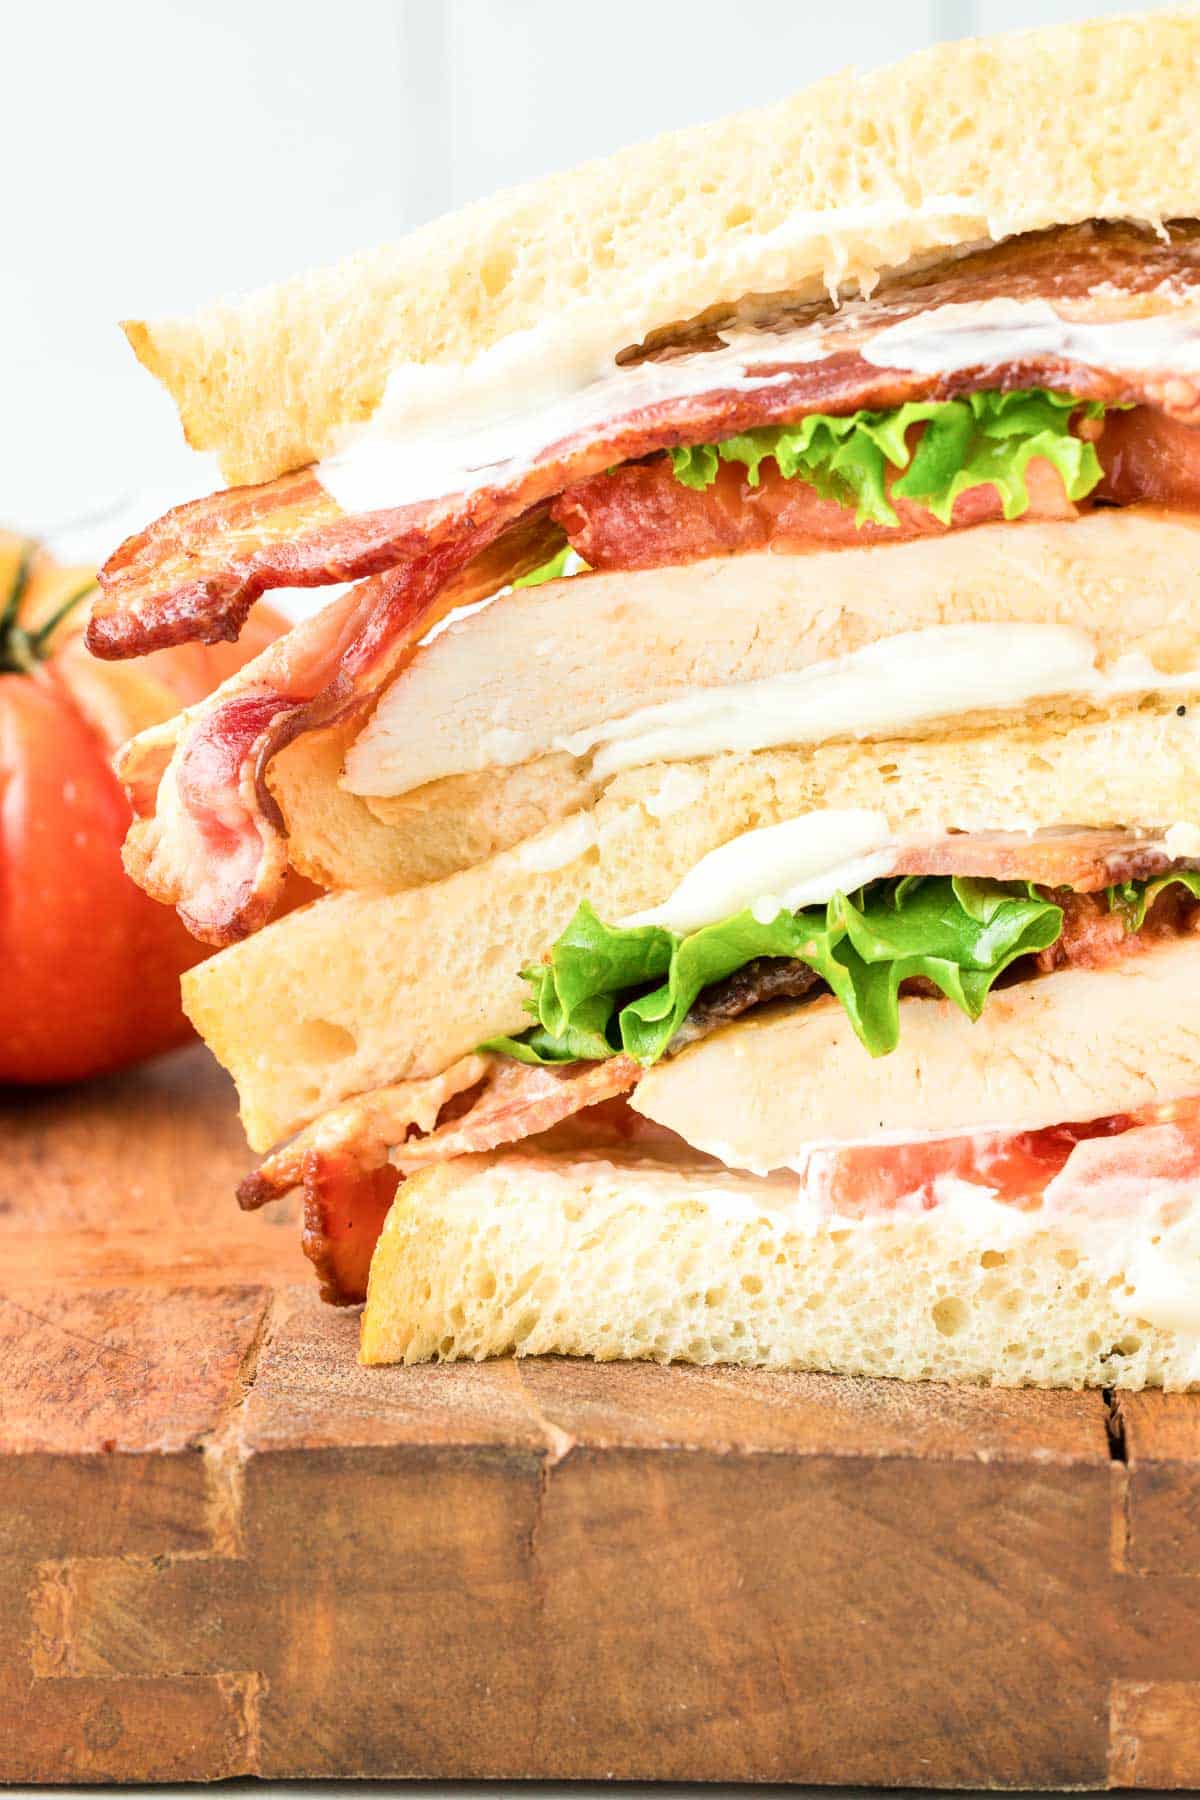 A sandwich with chicken, bacon, lettuce, and tomatoes on a wooden cutting board.